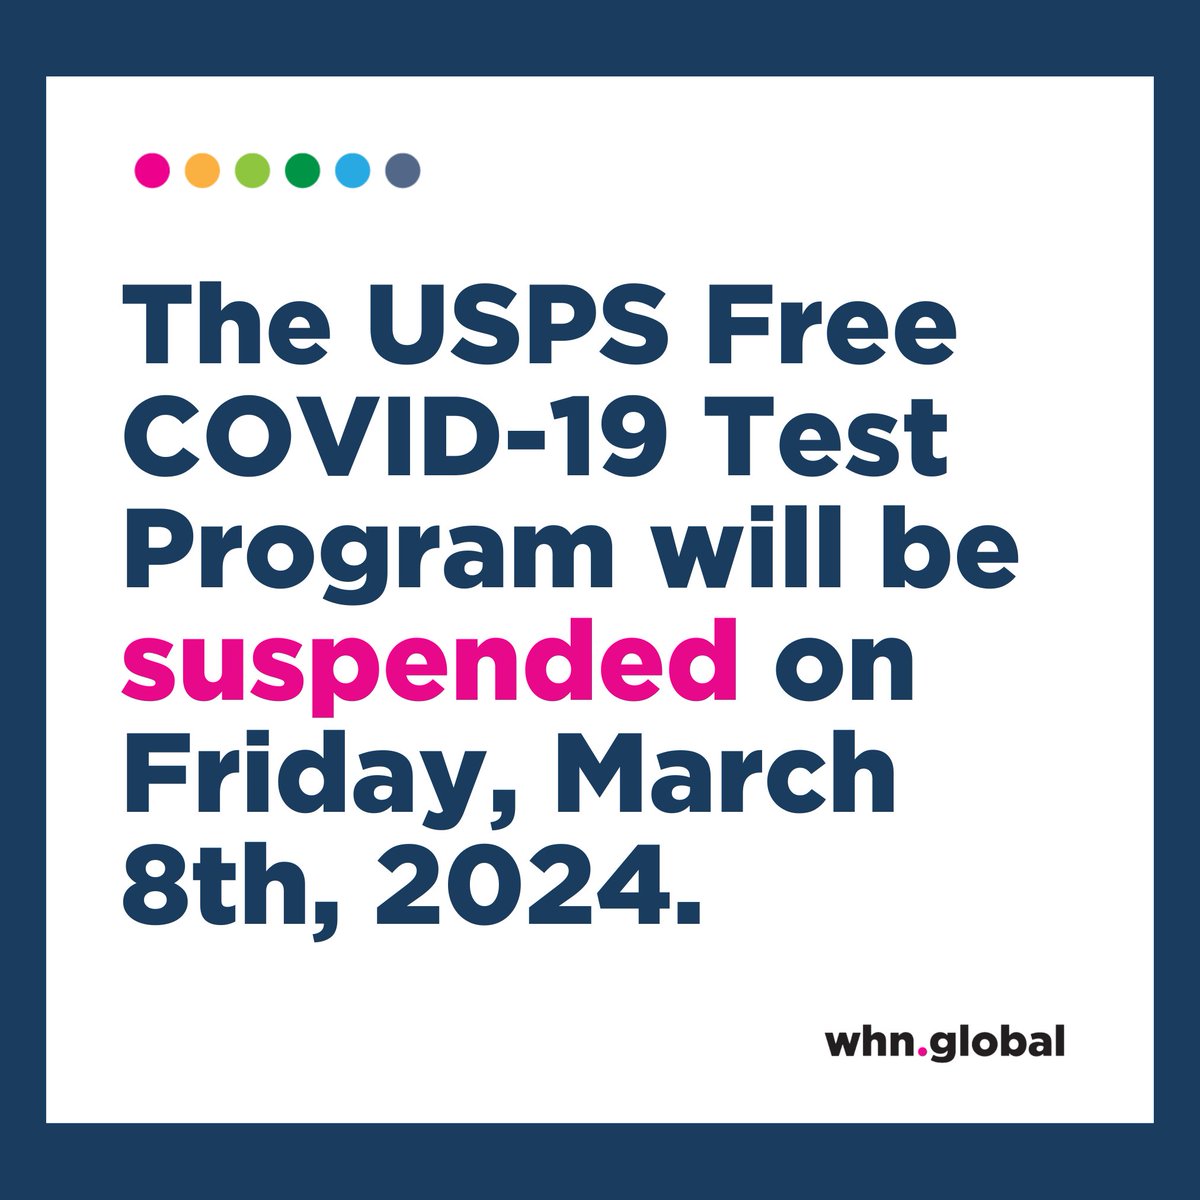 Last call for free USPS COVID-19 test kits! The program will be suspended on 03/08. Don’t miss out on securing your kits. Order today to stay prepared and safe. Visit special.usps.com/testkits to order. #COVID19 #StaySafe #TestKits